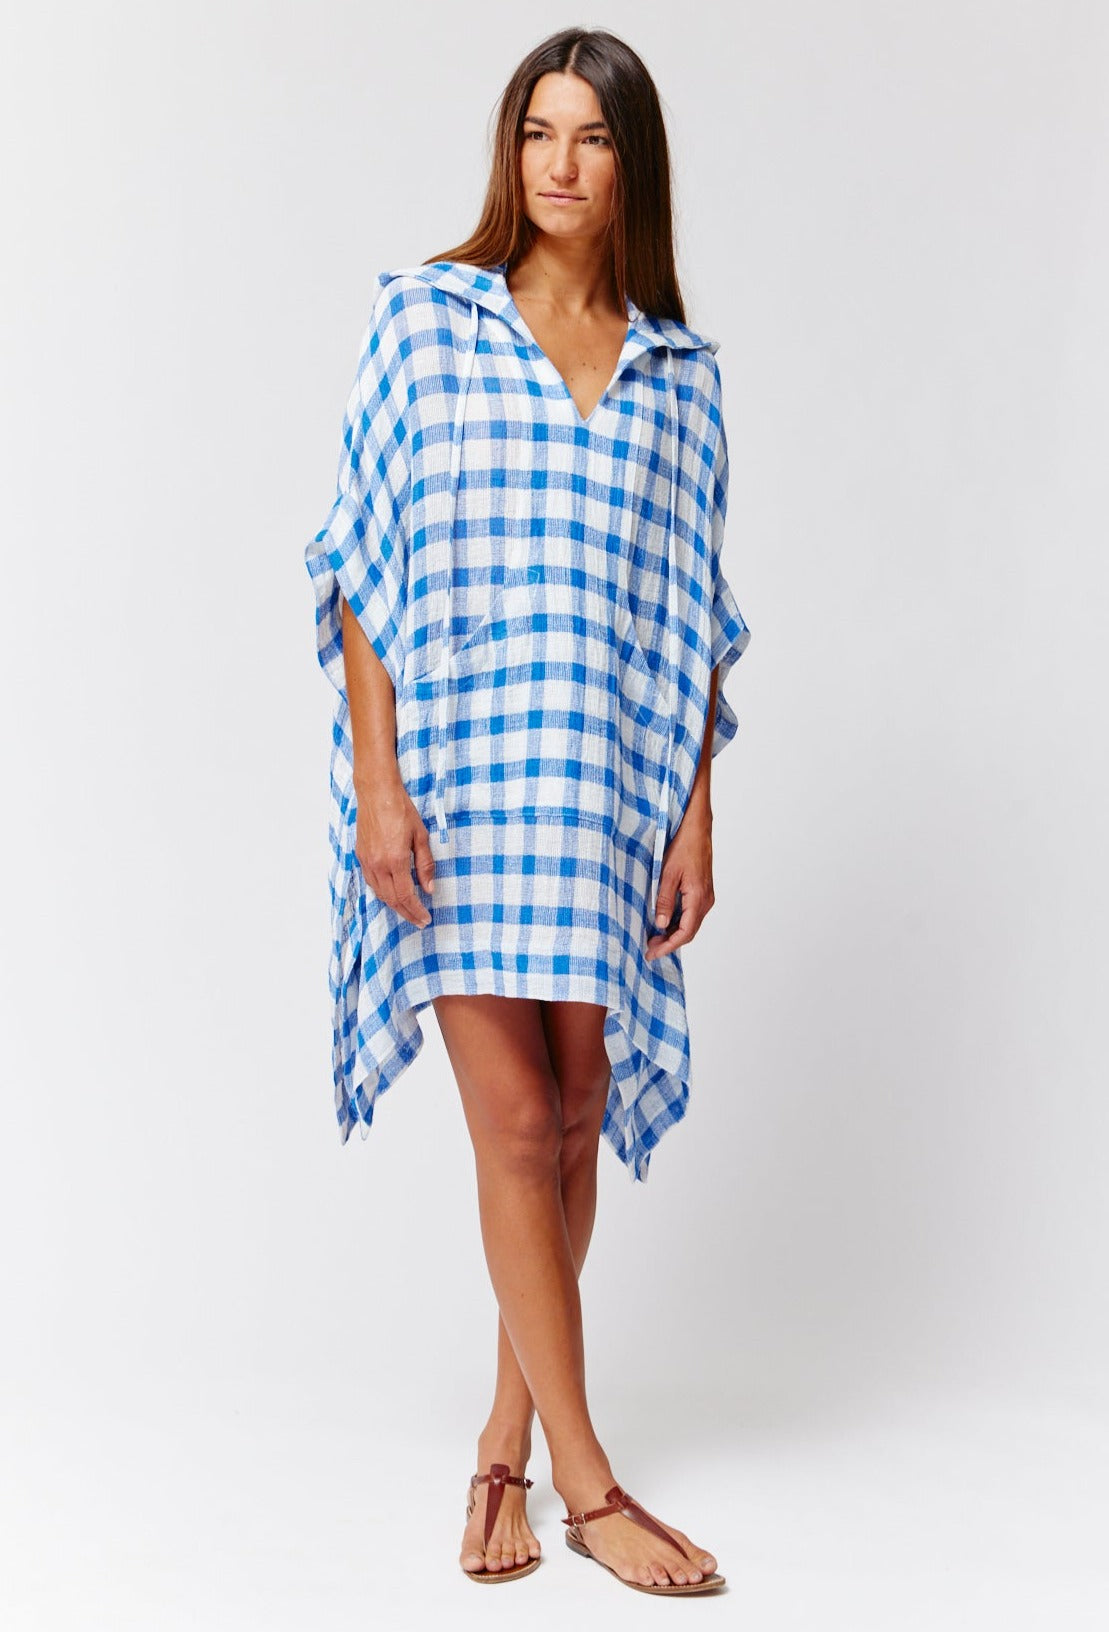 THE HOODED PONCHO in FRENCH BLUE &  WHITE GINGHAM CHIOS GAUZE